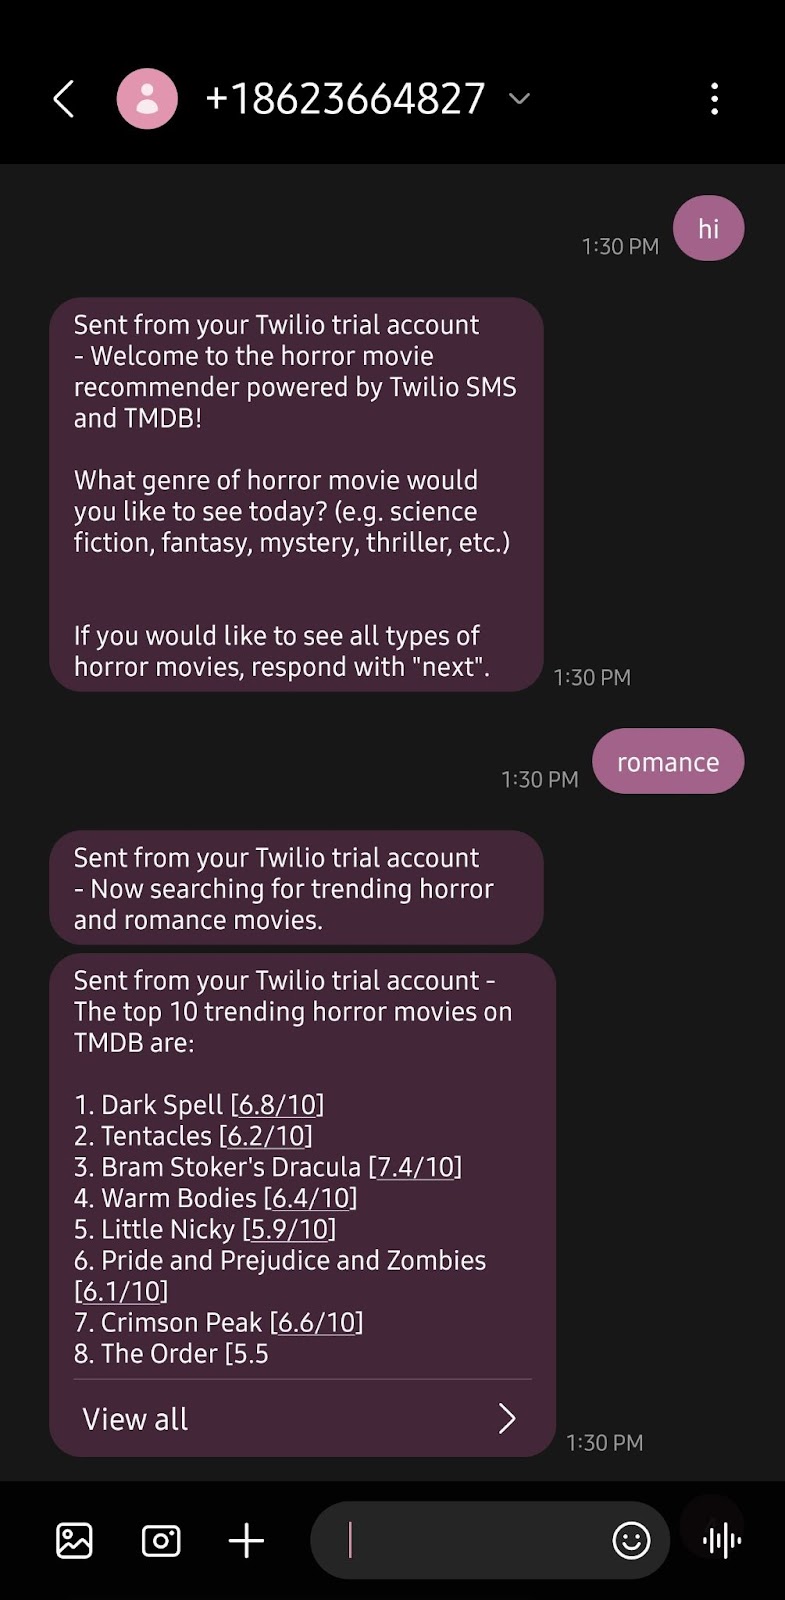 Text messages from a Twilio phone number giving horror movie recommendations